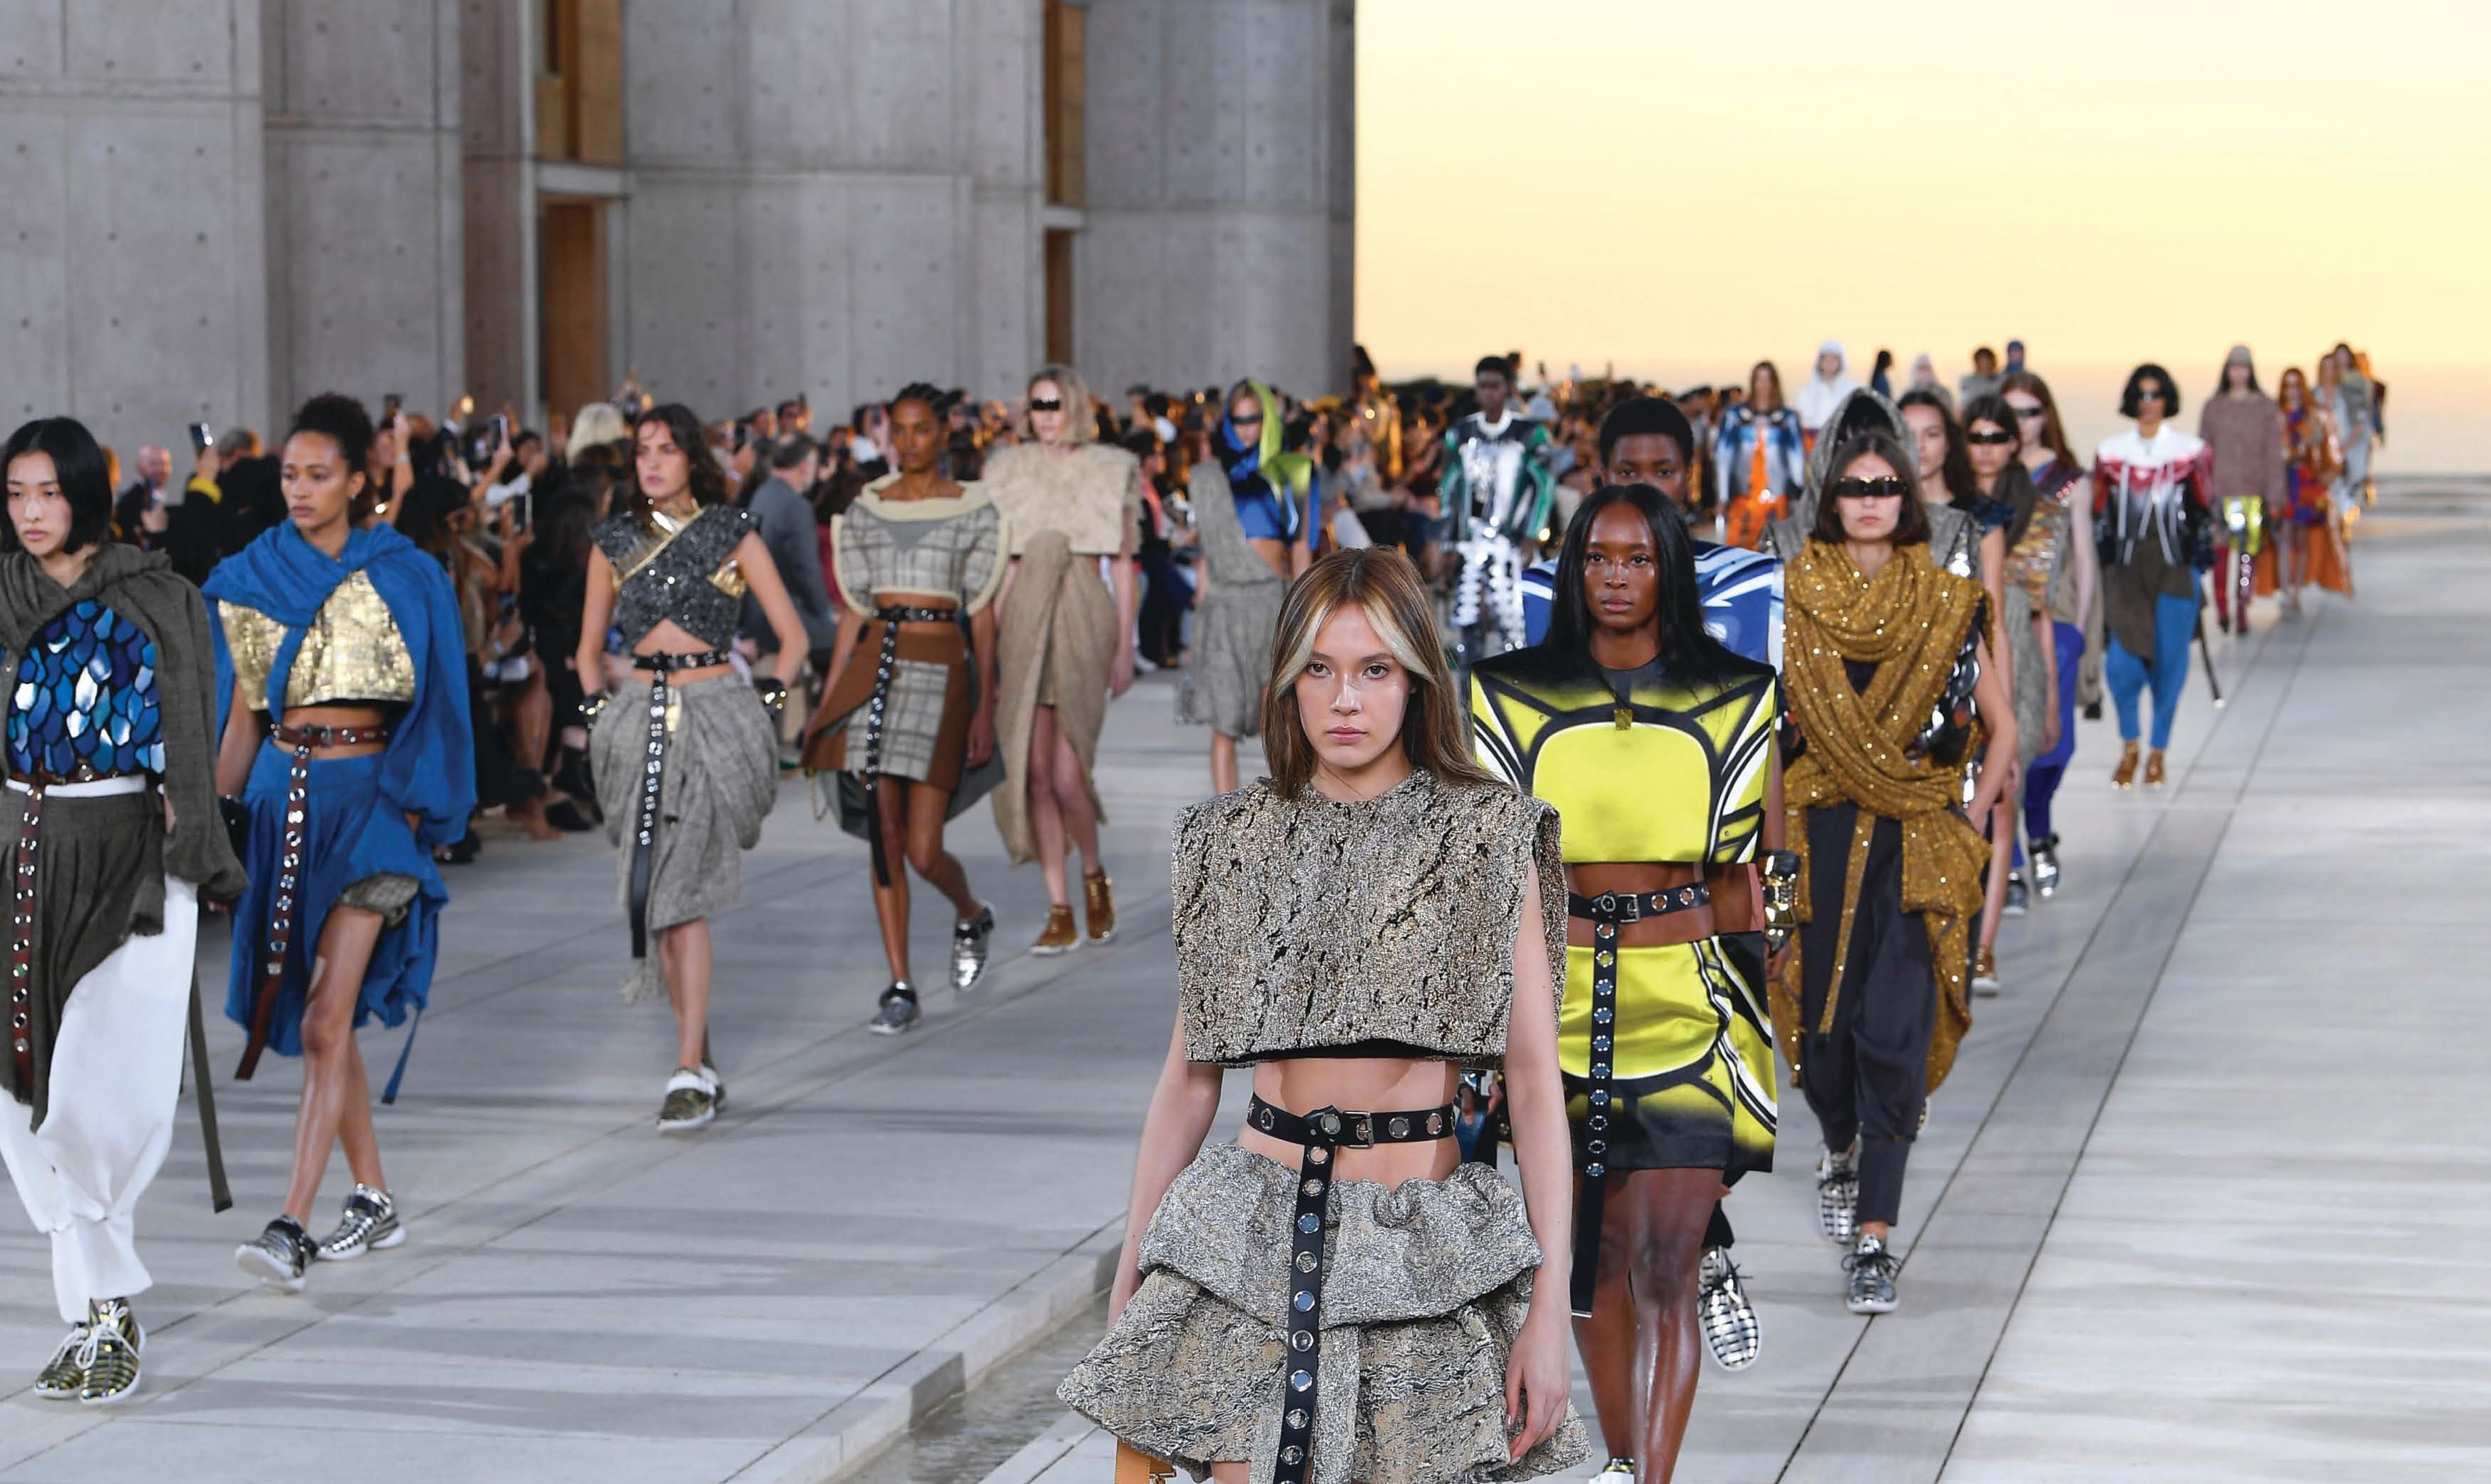 In total, Louis Vuitton revealed 56 looks during its cruise 2023 runway show in La Jolla. PHOTO COURTESY OF LOUIS VUITTON